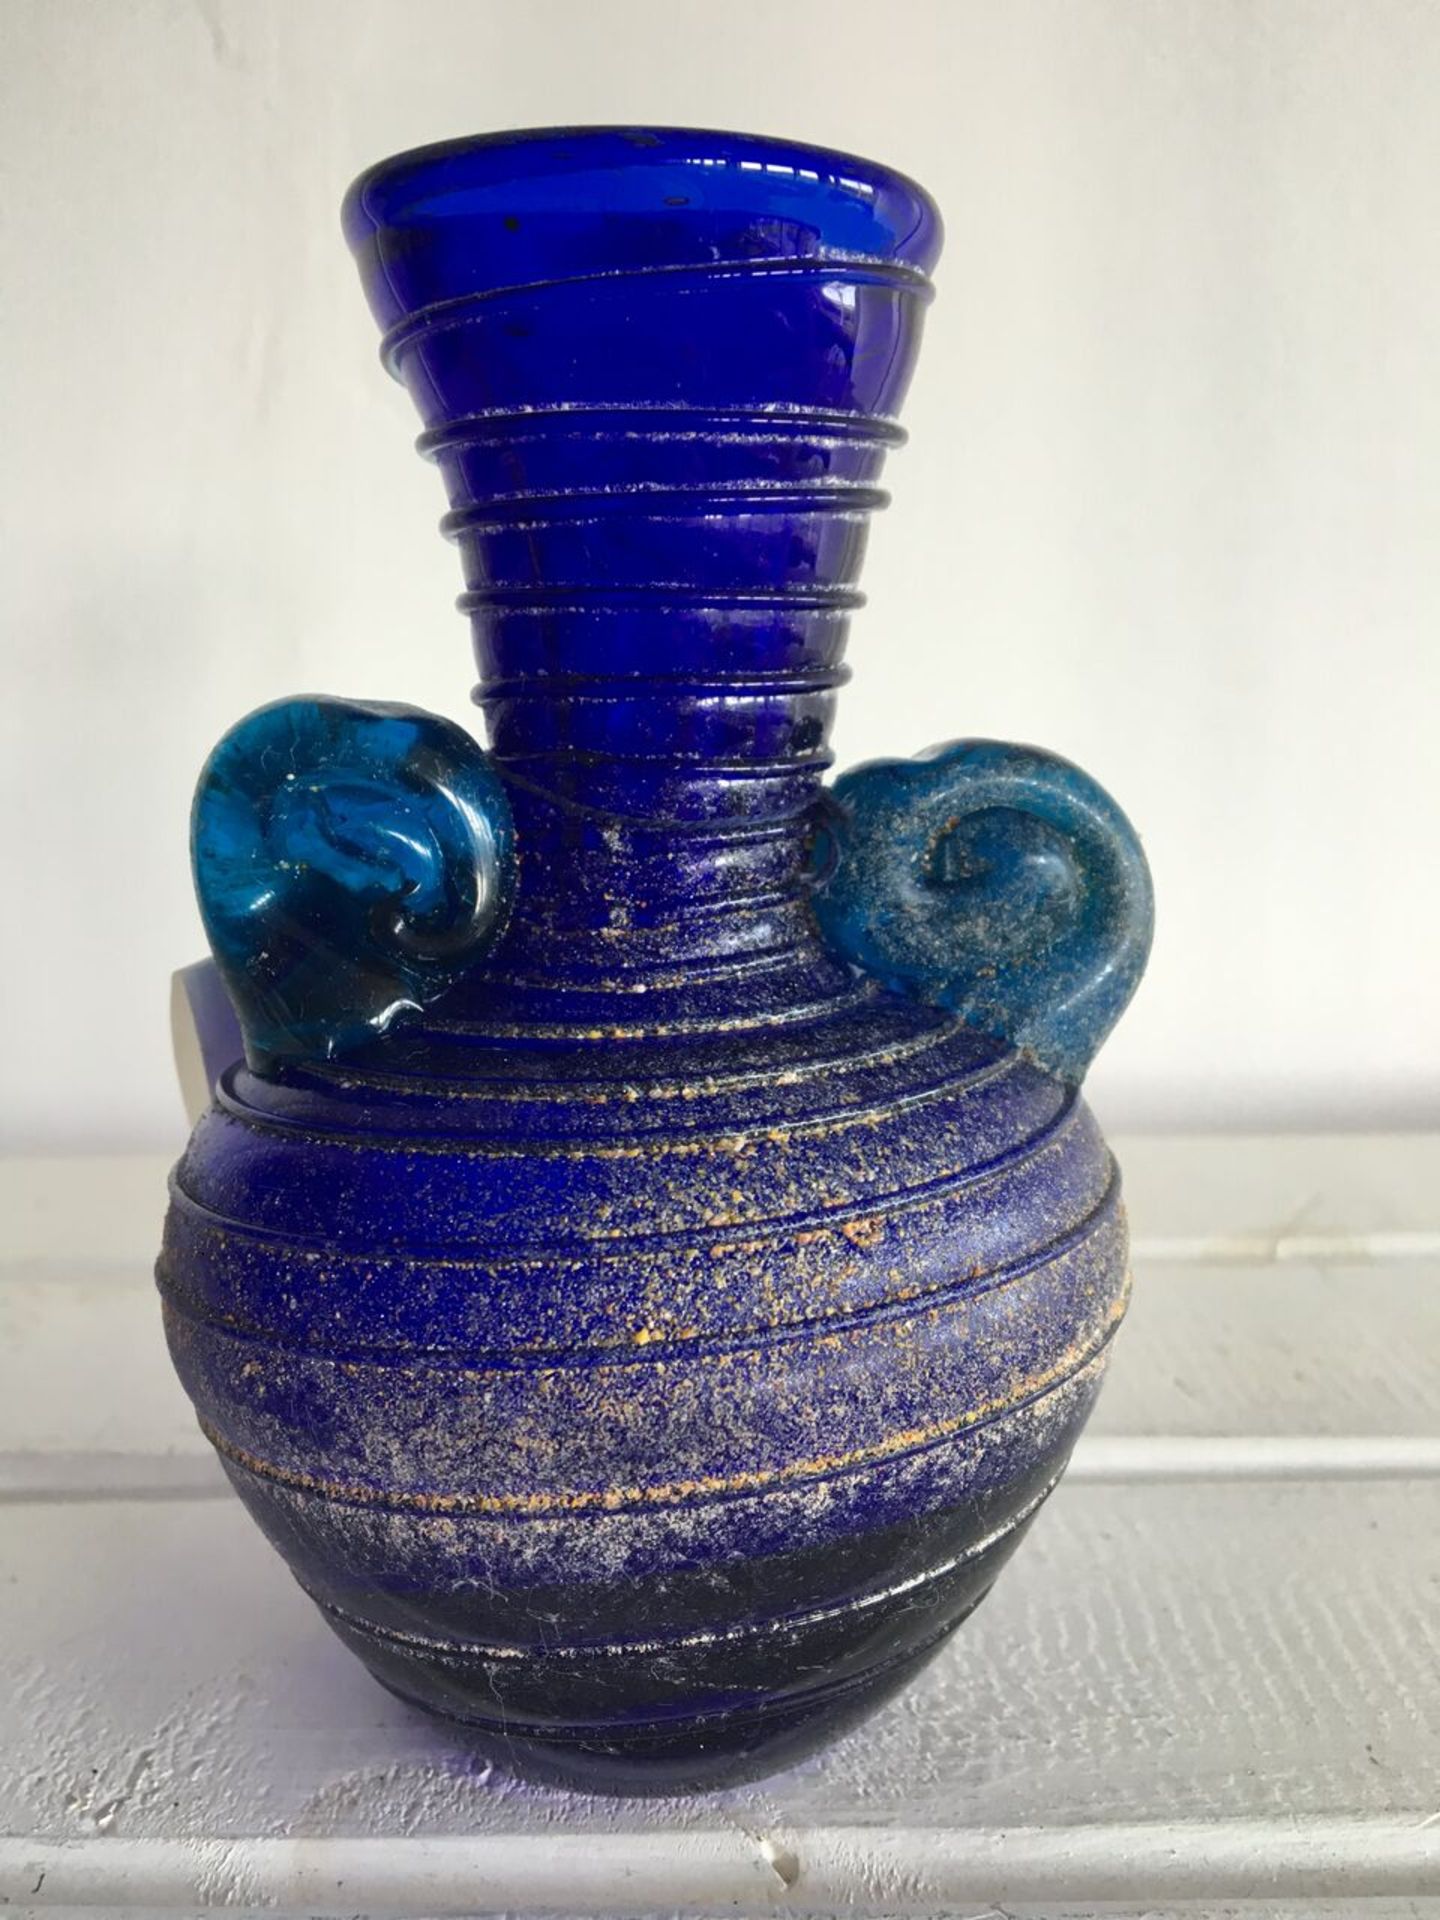 ITALIAN ART GLASS VASE IN BLUES, IN VERY GOOD CONDITION WITH ORIGINAL LABEL - FADED. 14CM HIGH. FREE